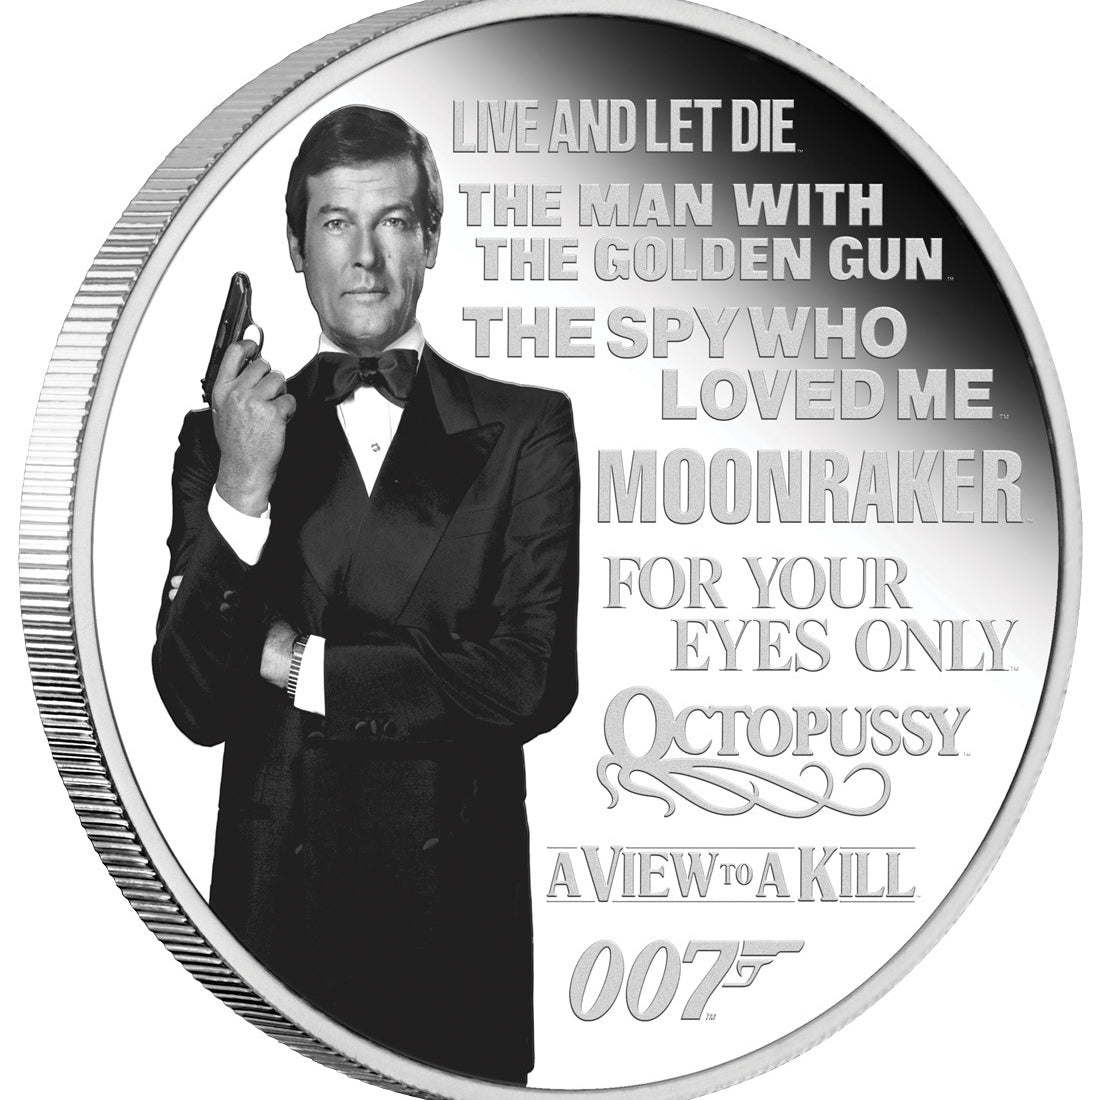 James Bond Legacy Series – 2nd Issue 2022 1oz Silver Proof Coloured Coin